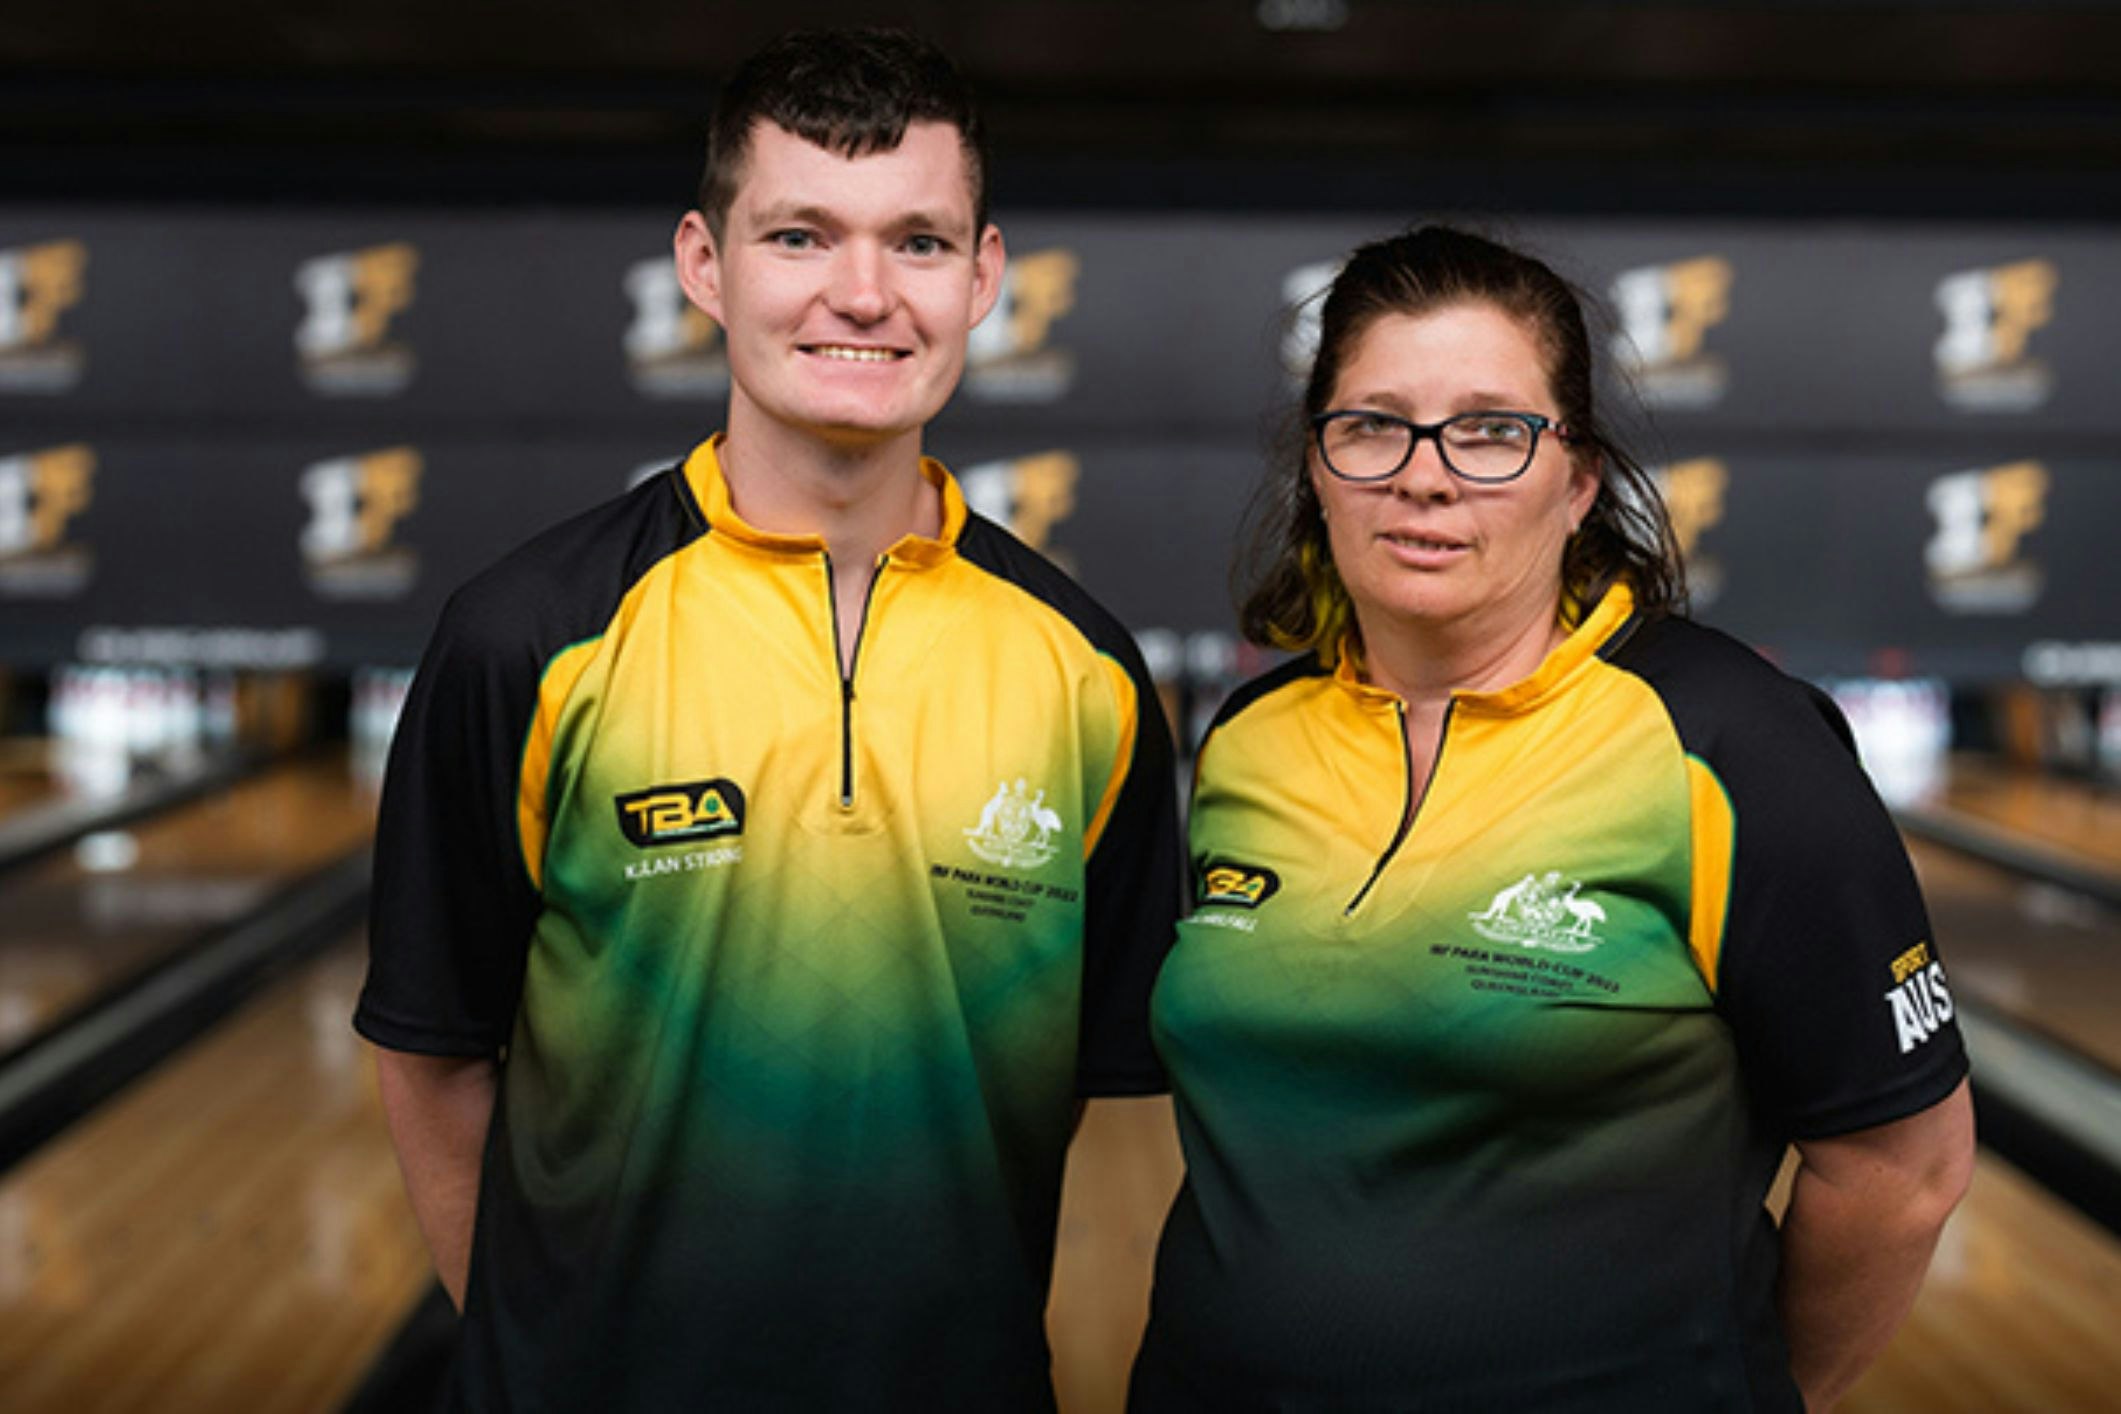 Gold medallists Kallan Strong (Sportsperson of the Year with a Disability 2022) and Amanda Threlfall (2022 Para Bowling World Cup champion) are in attendance at one of the biggest disability sporting events in Australia. (Source: Tenpin Bowling Australia)
